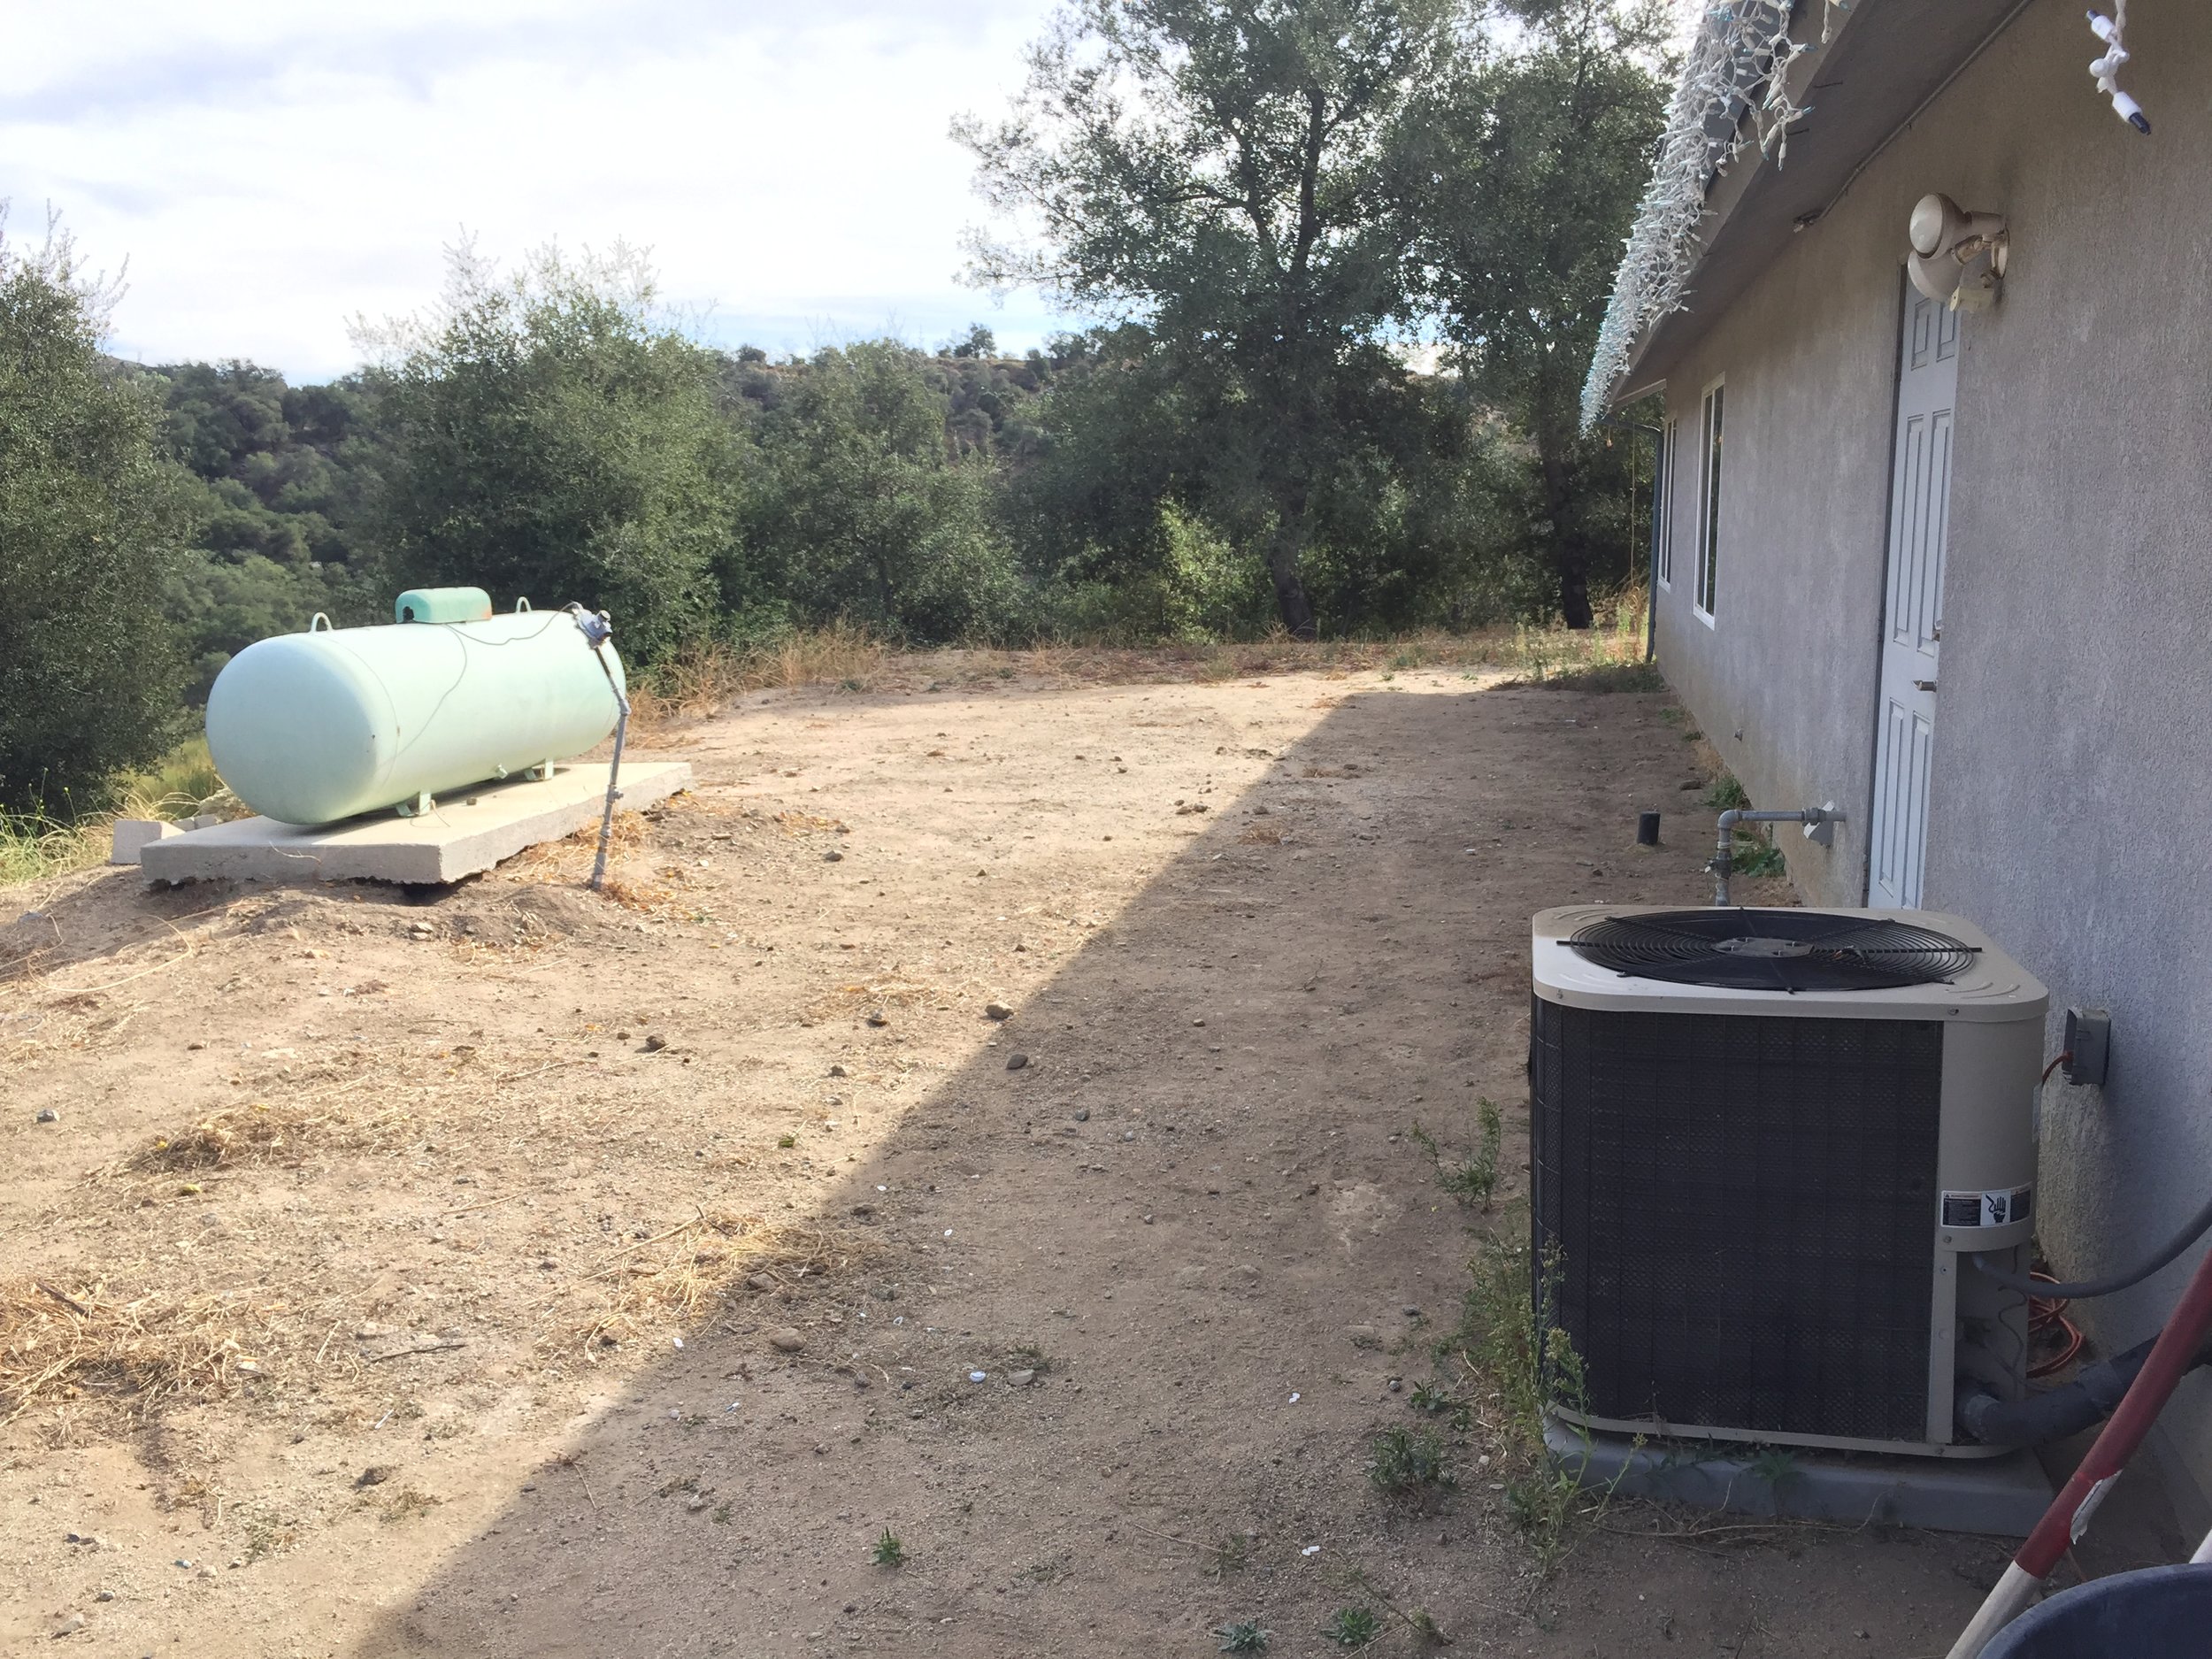 Laundry Greywater Area Before Breaking Ground